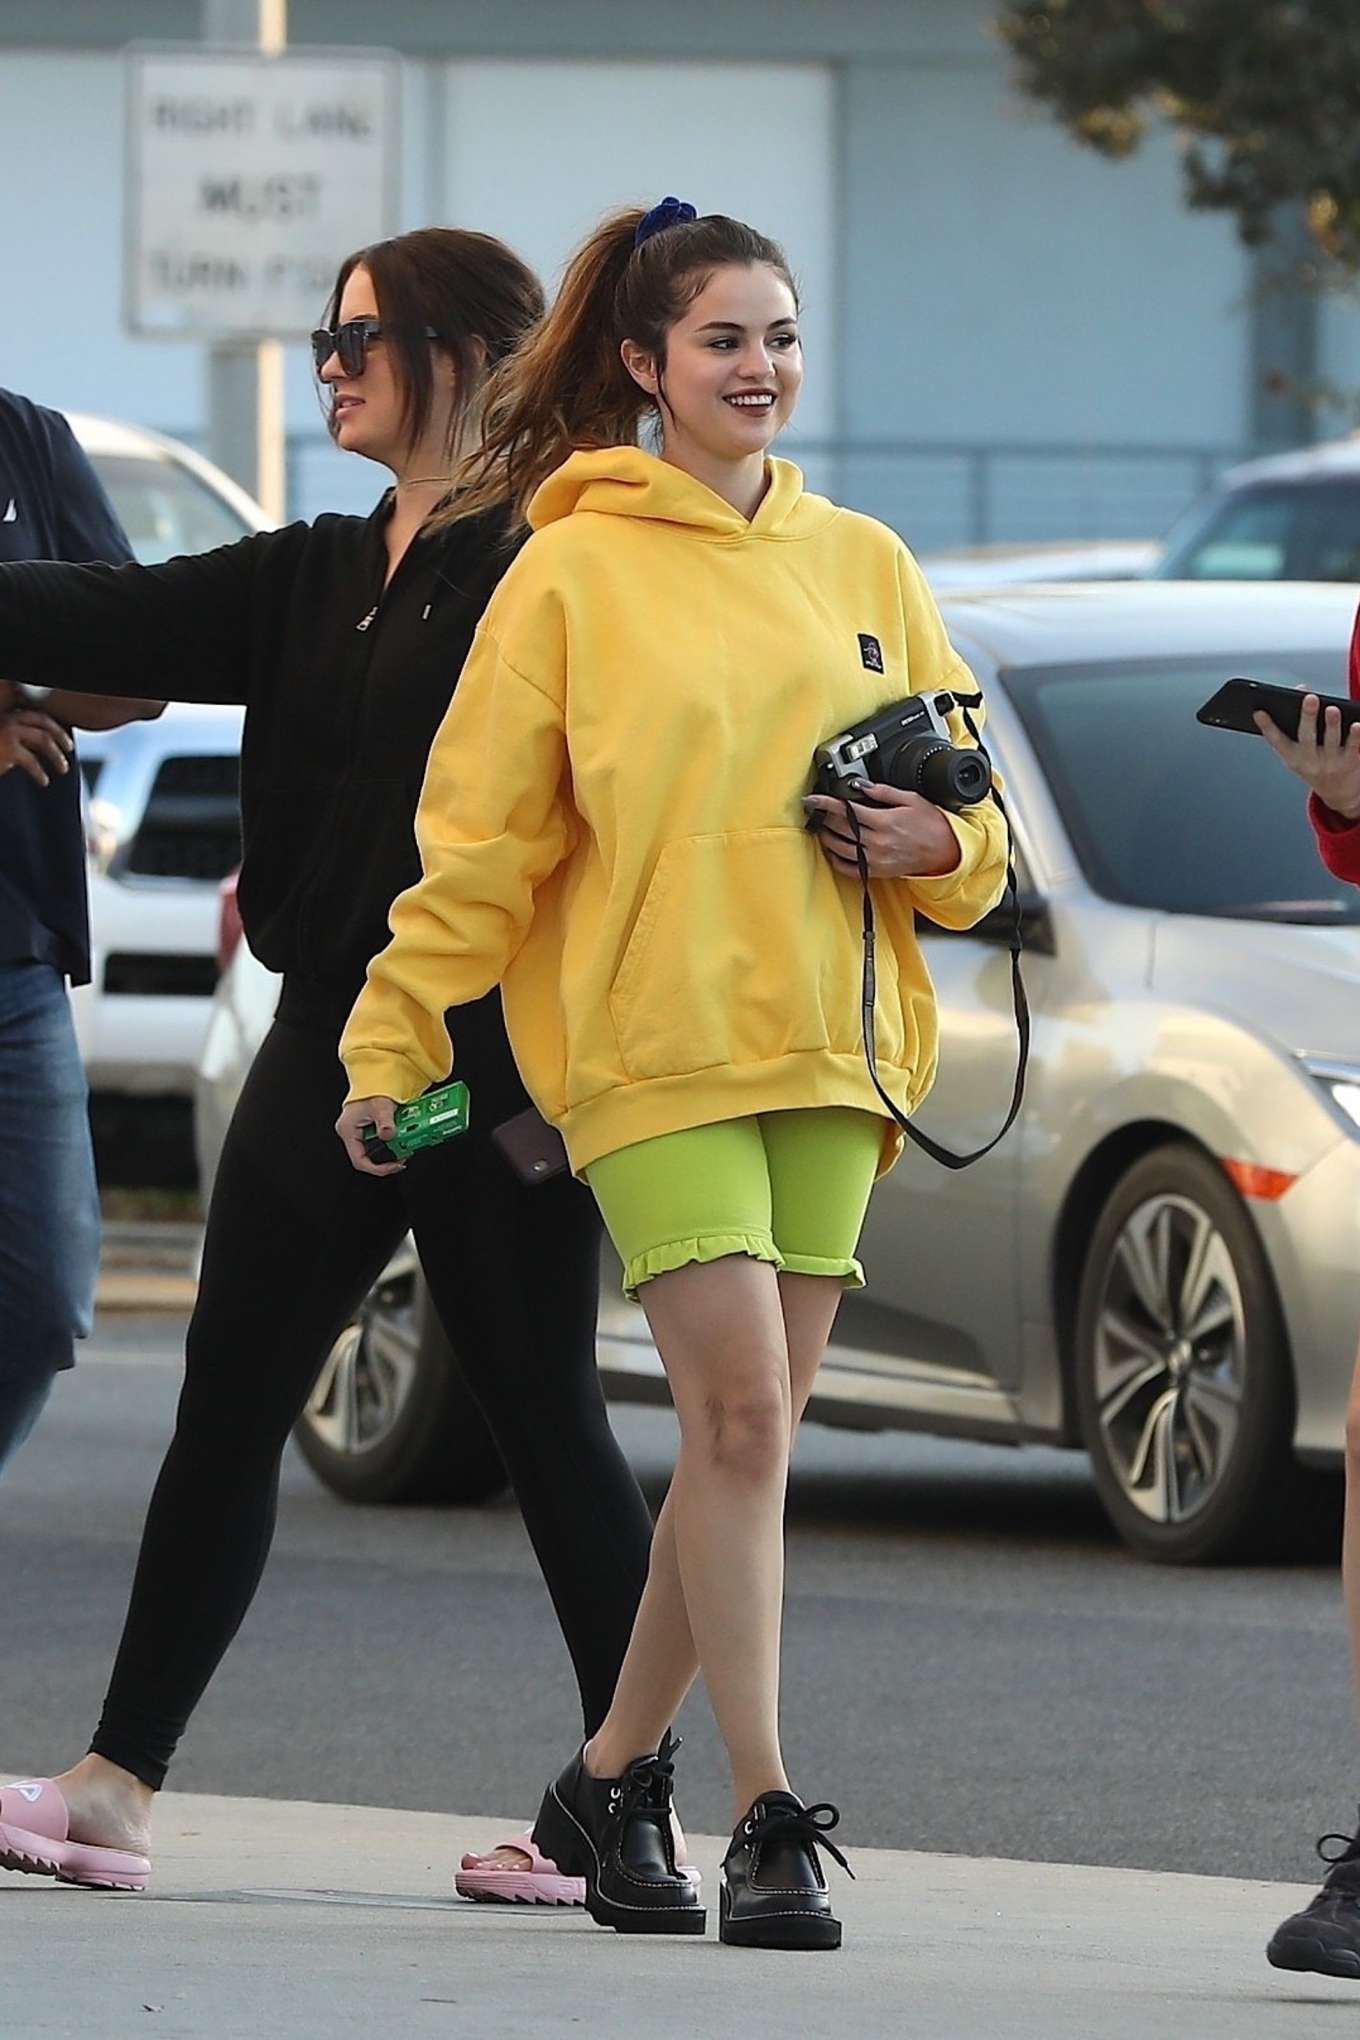 Selena Gomez 2019 : Selena Gomez – Shops with friends at Gelsons in Los Angeles-29